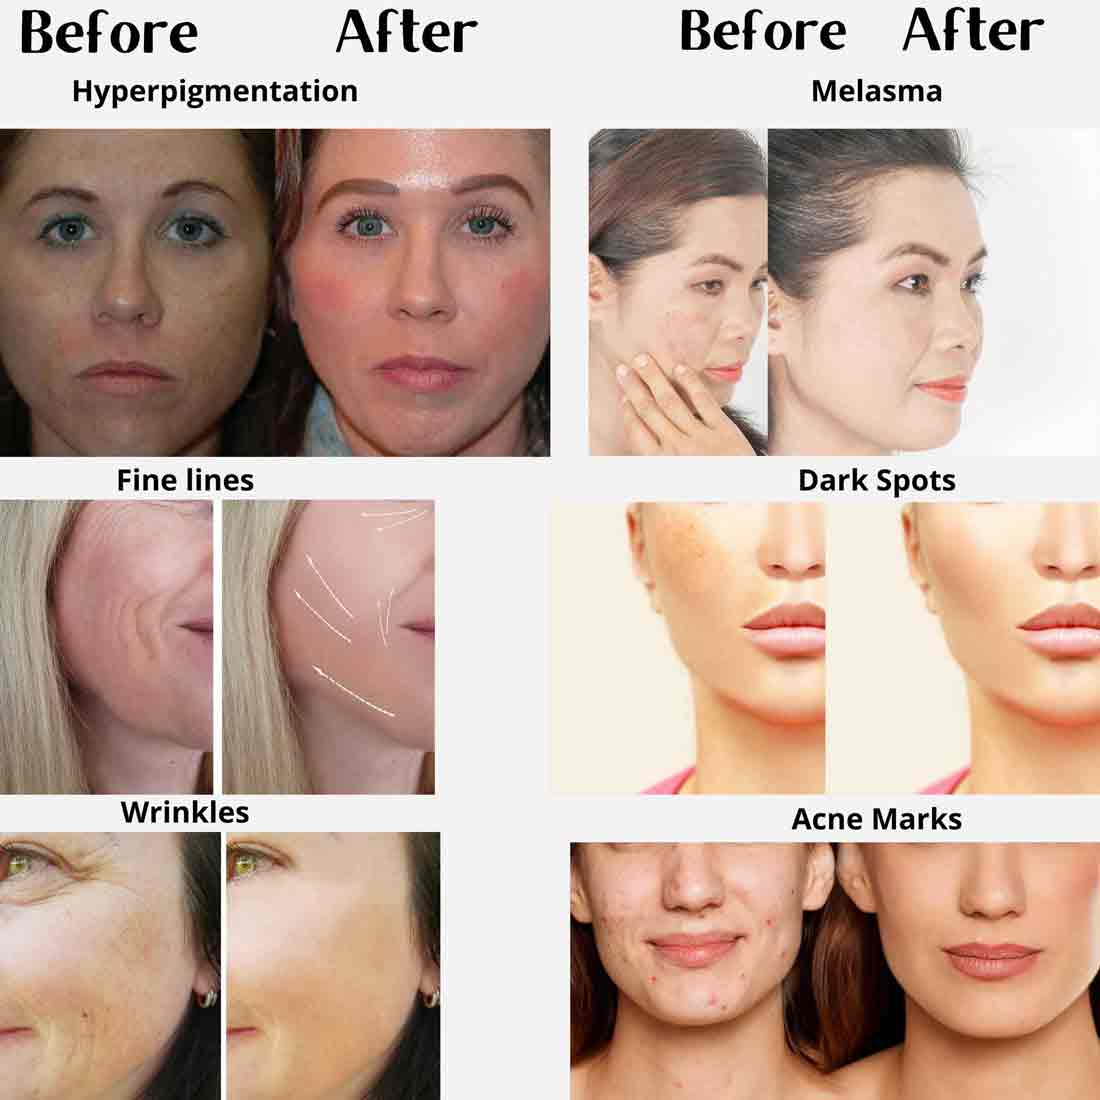 Collage showing before and after results of a facial cream treatment on various skin concerns: Hyperpigmentation, Melasma, Fine Lines, Dark Spots, Wrinkles, and Acne Marks.